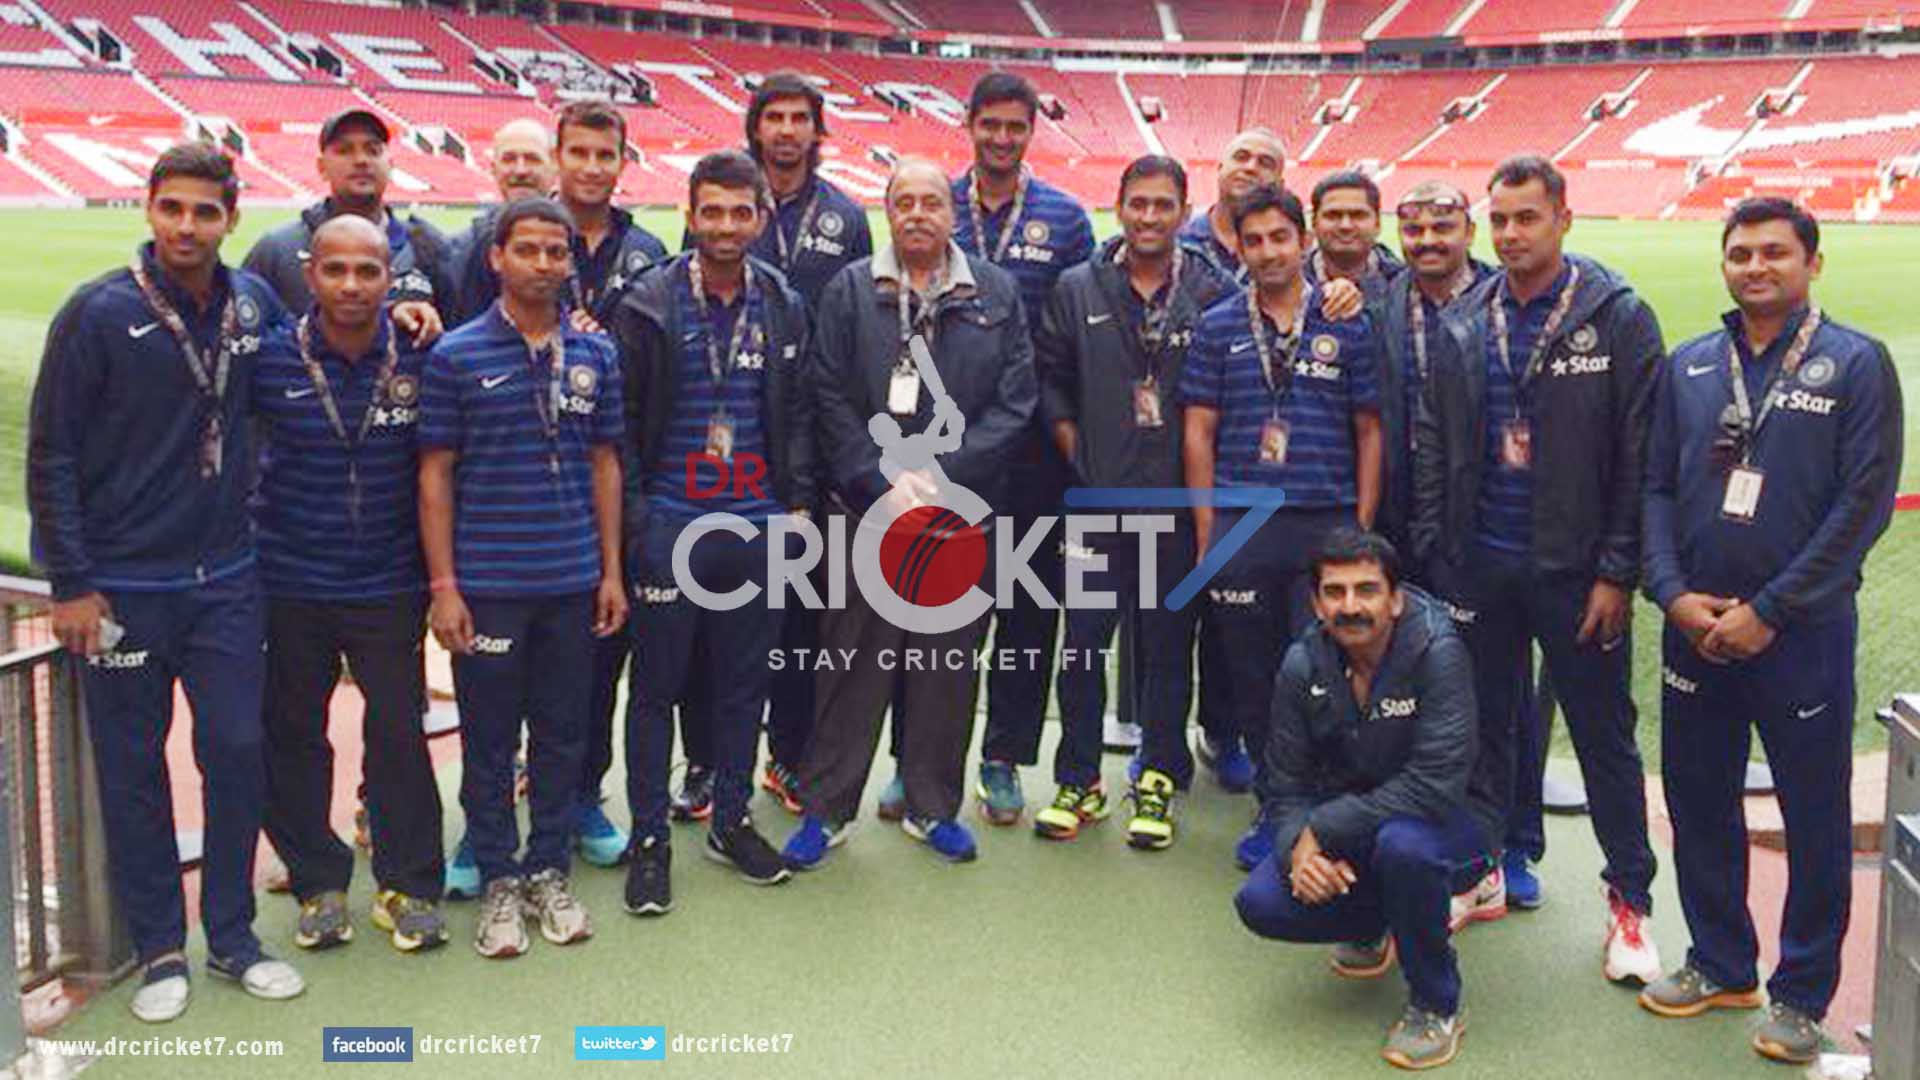 Watch Exclusive Video of Team India at Manchester United F.C